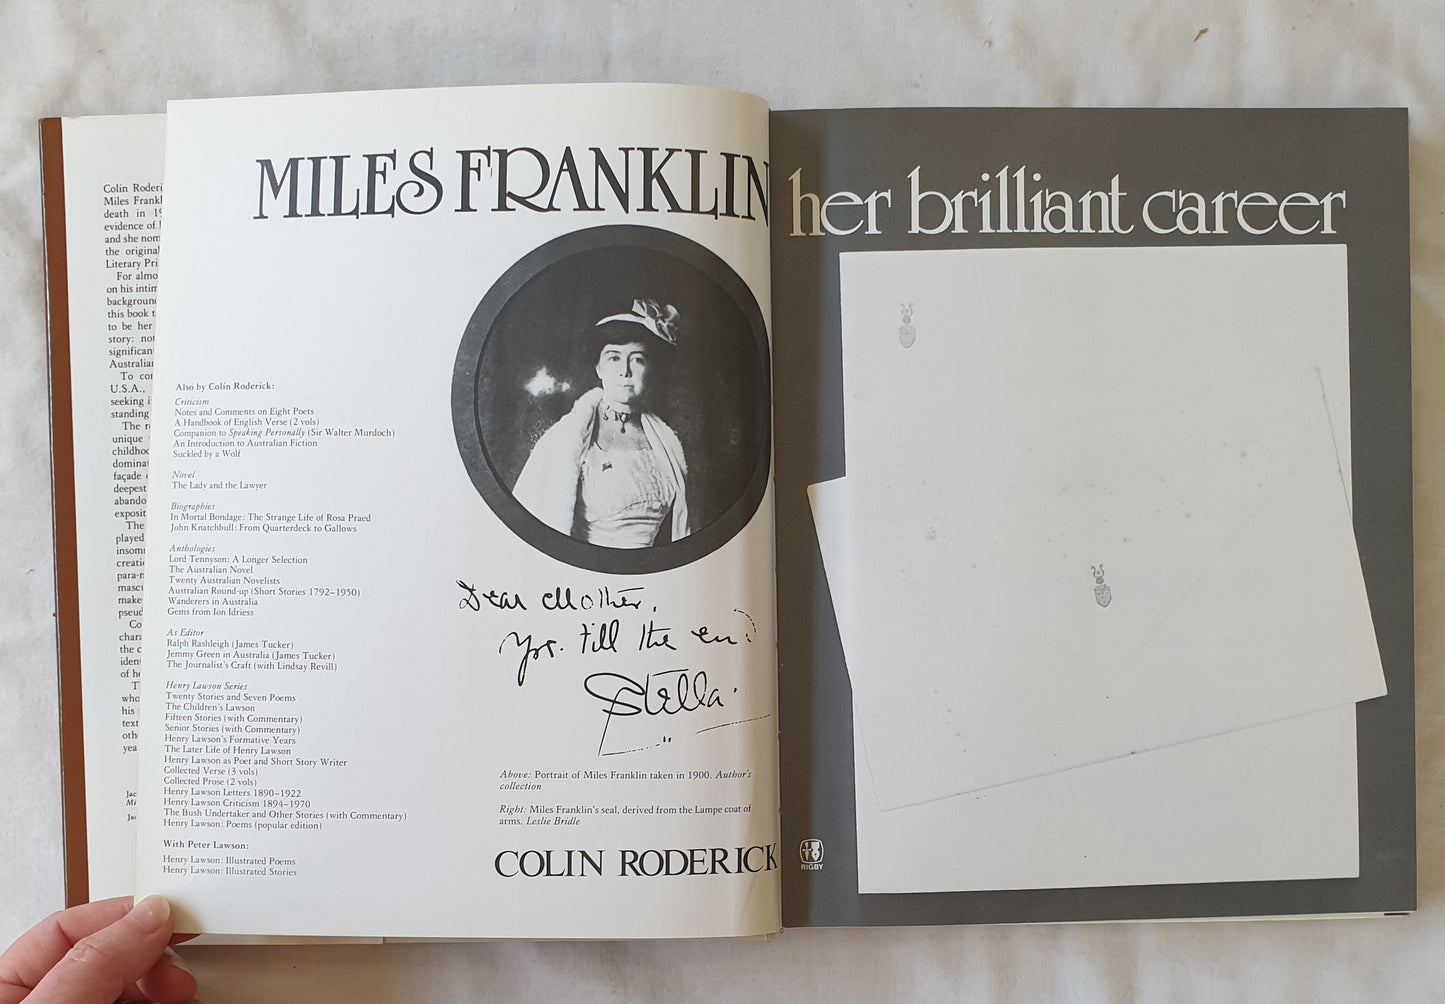 Miles Franklin Her Brilliant Career by Colin Roderick